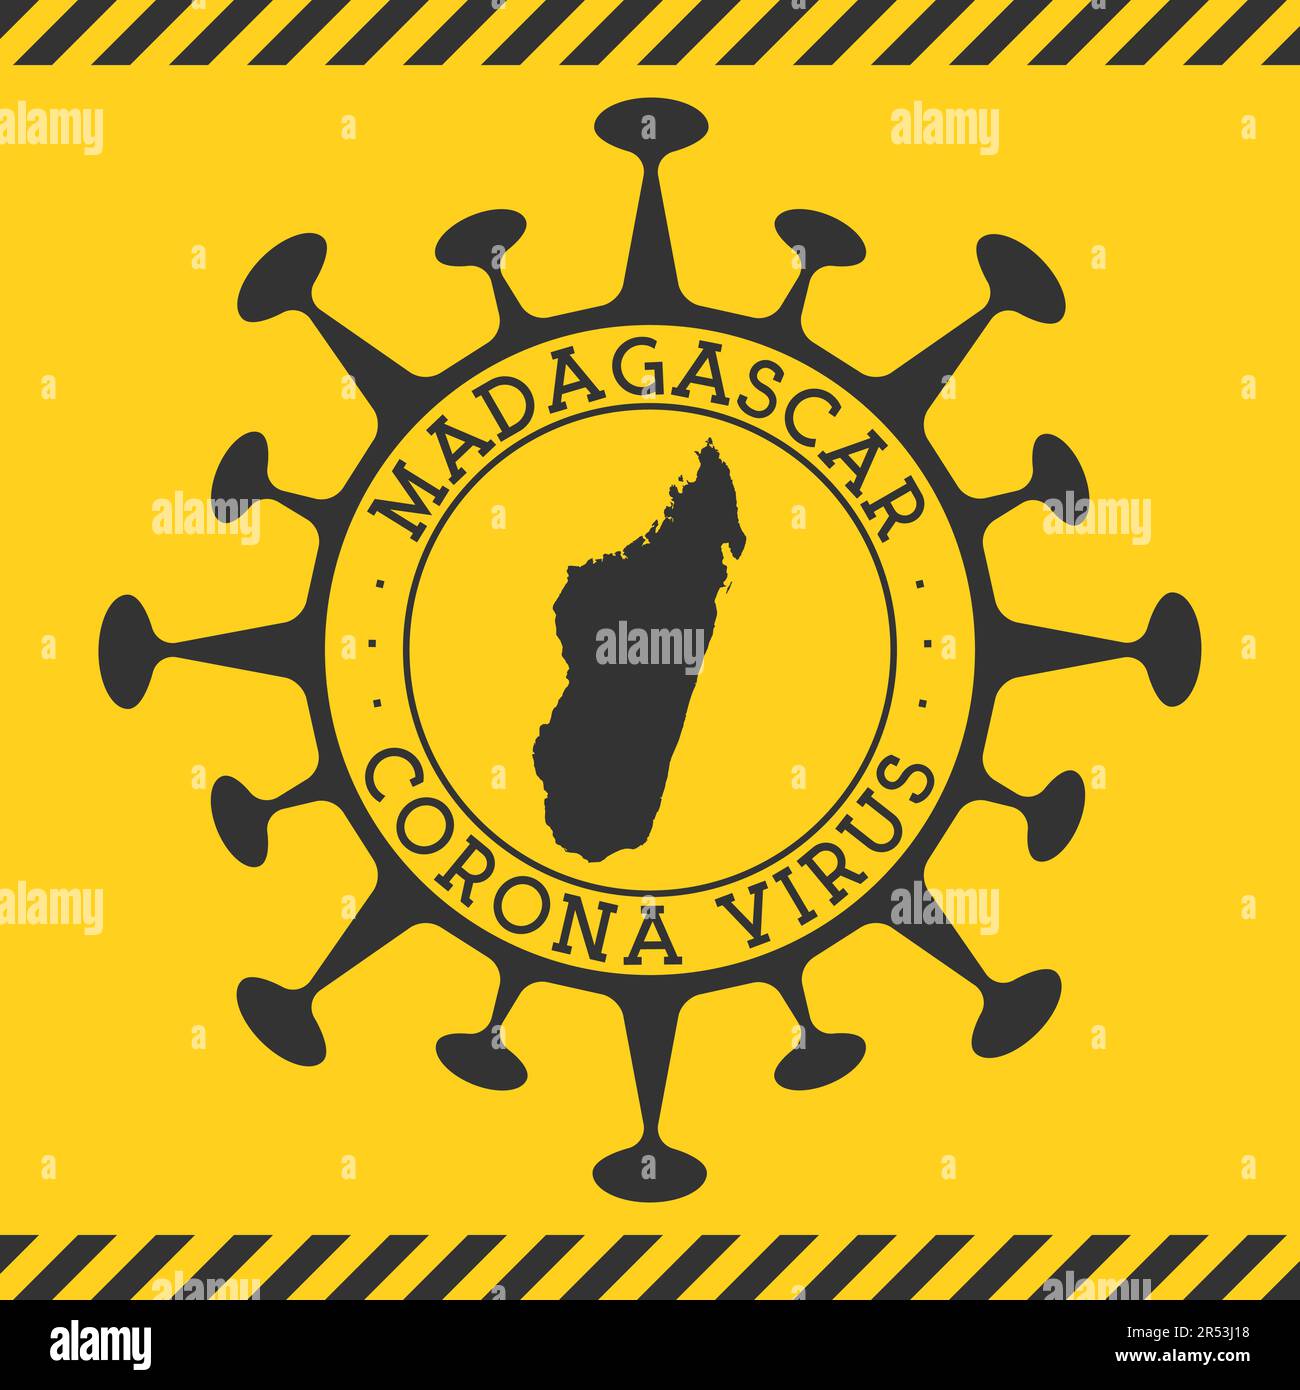 Corona virus in Madagascar sign. Round badge with shape of virus and Madagascar map. Yellow country epidemy lock down stamp. Vector illustration. Stock Vector